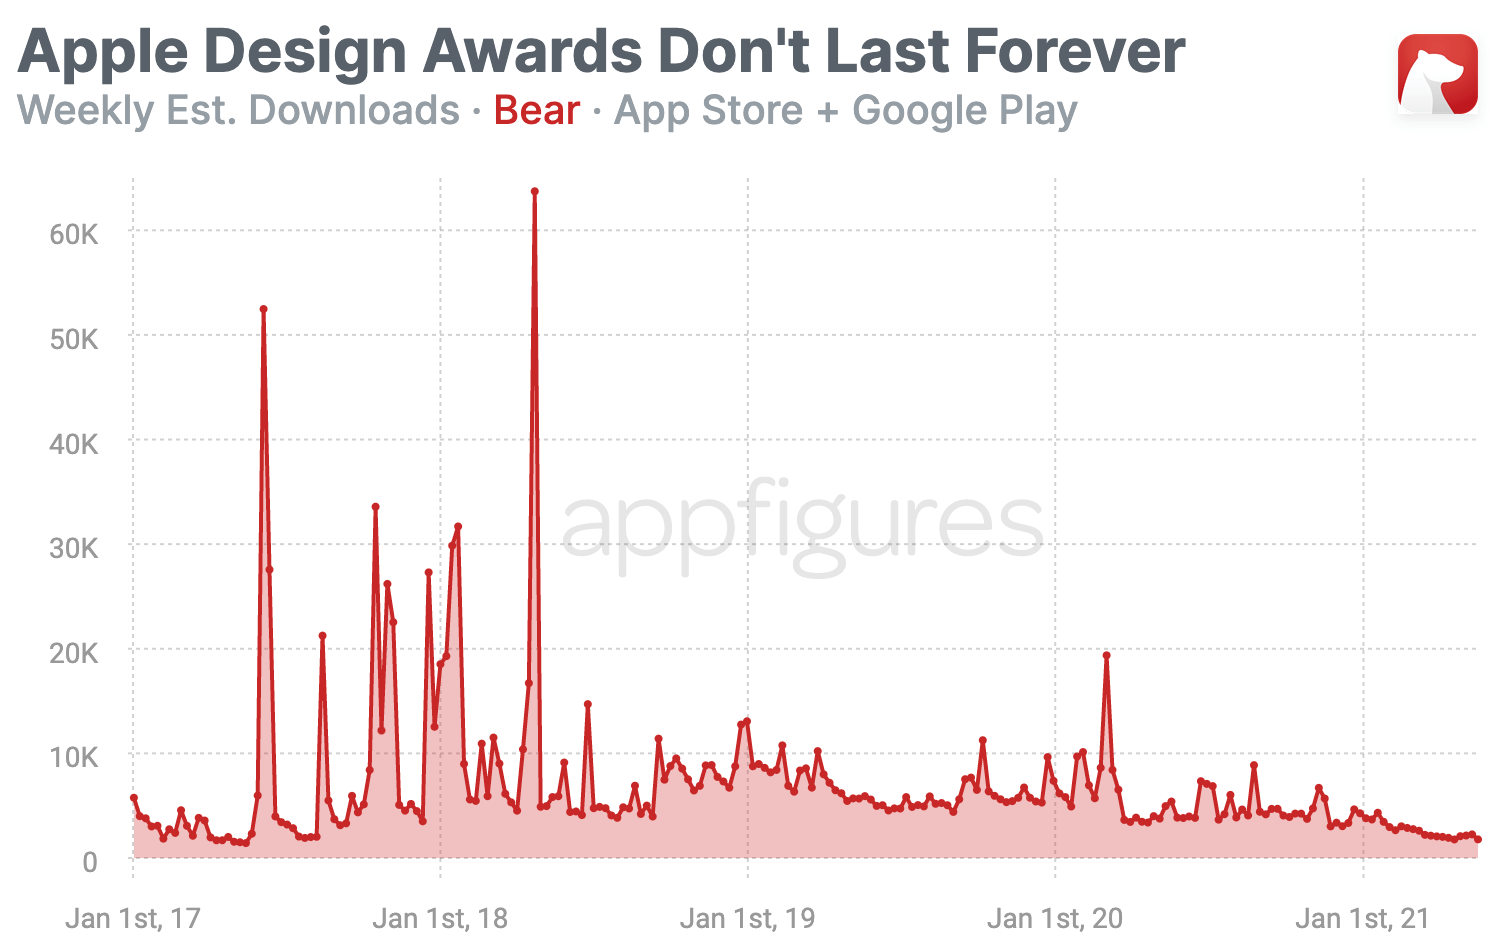 Trend of estimated downloads by Appfigures